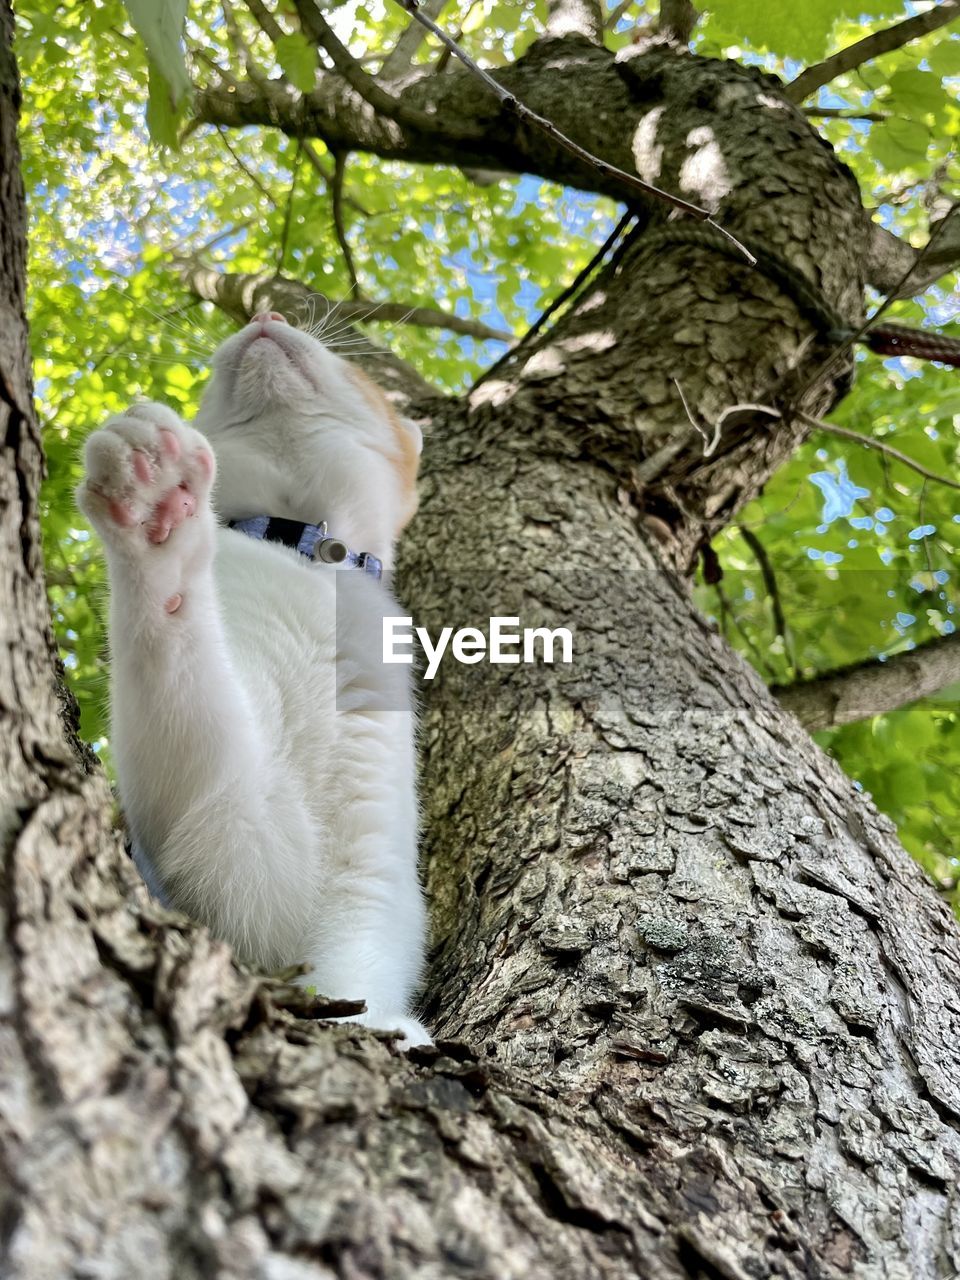 Red tabby kittrn in a tree looking up